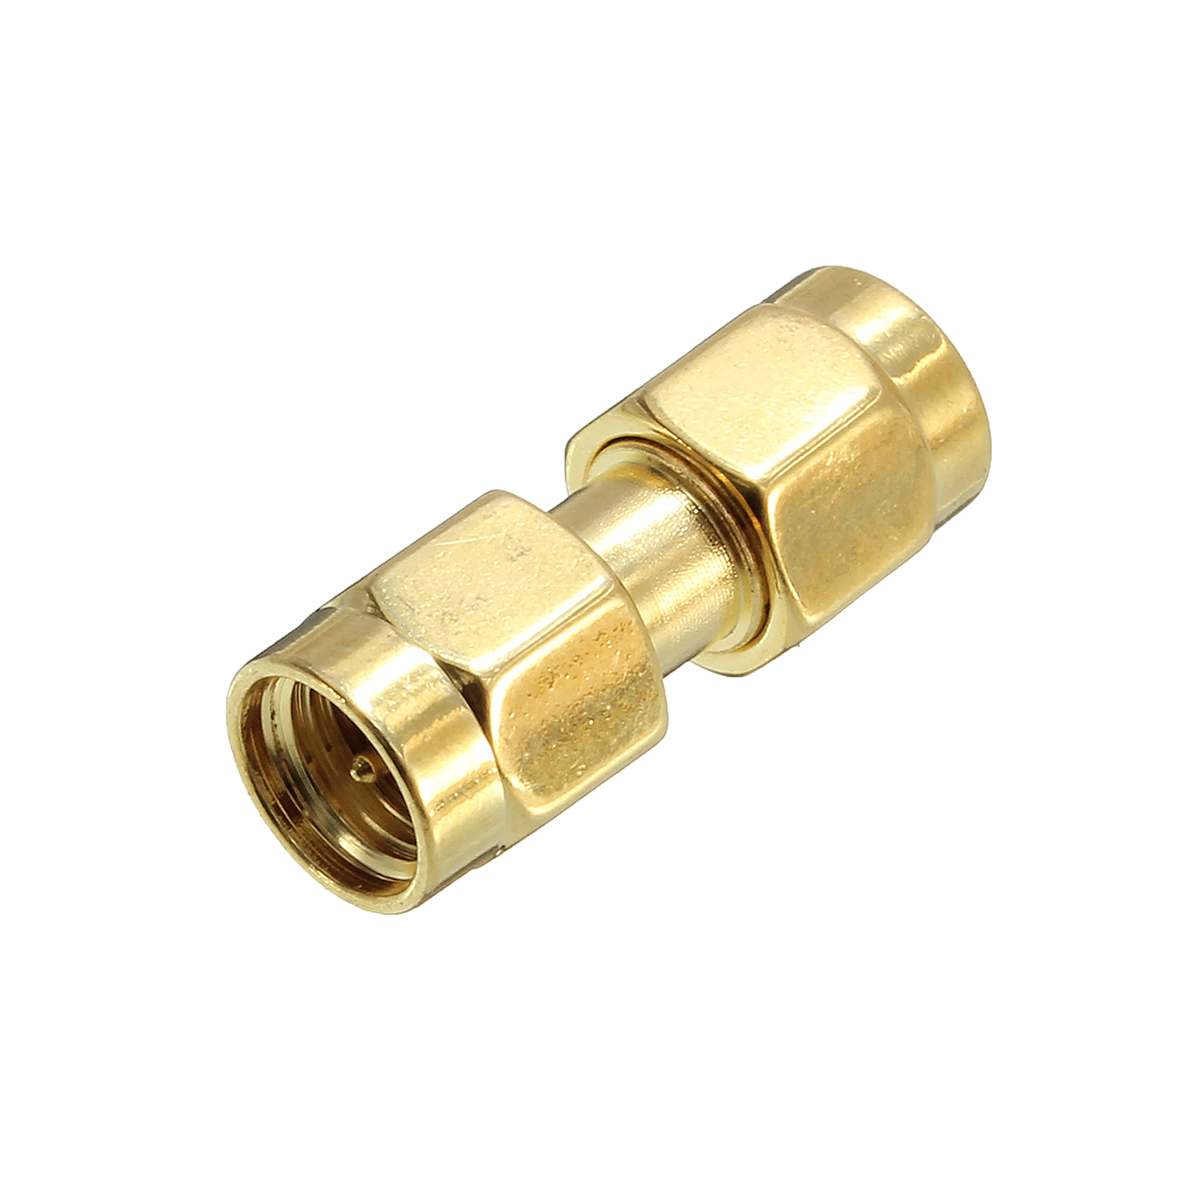 Excellwayreg-CA01-2Pcs-Copper-SMA-Male-To-SMA-Male-Plug-RF-Coaxial-Adapter-Connector-1073343-7